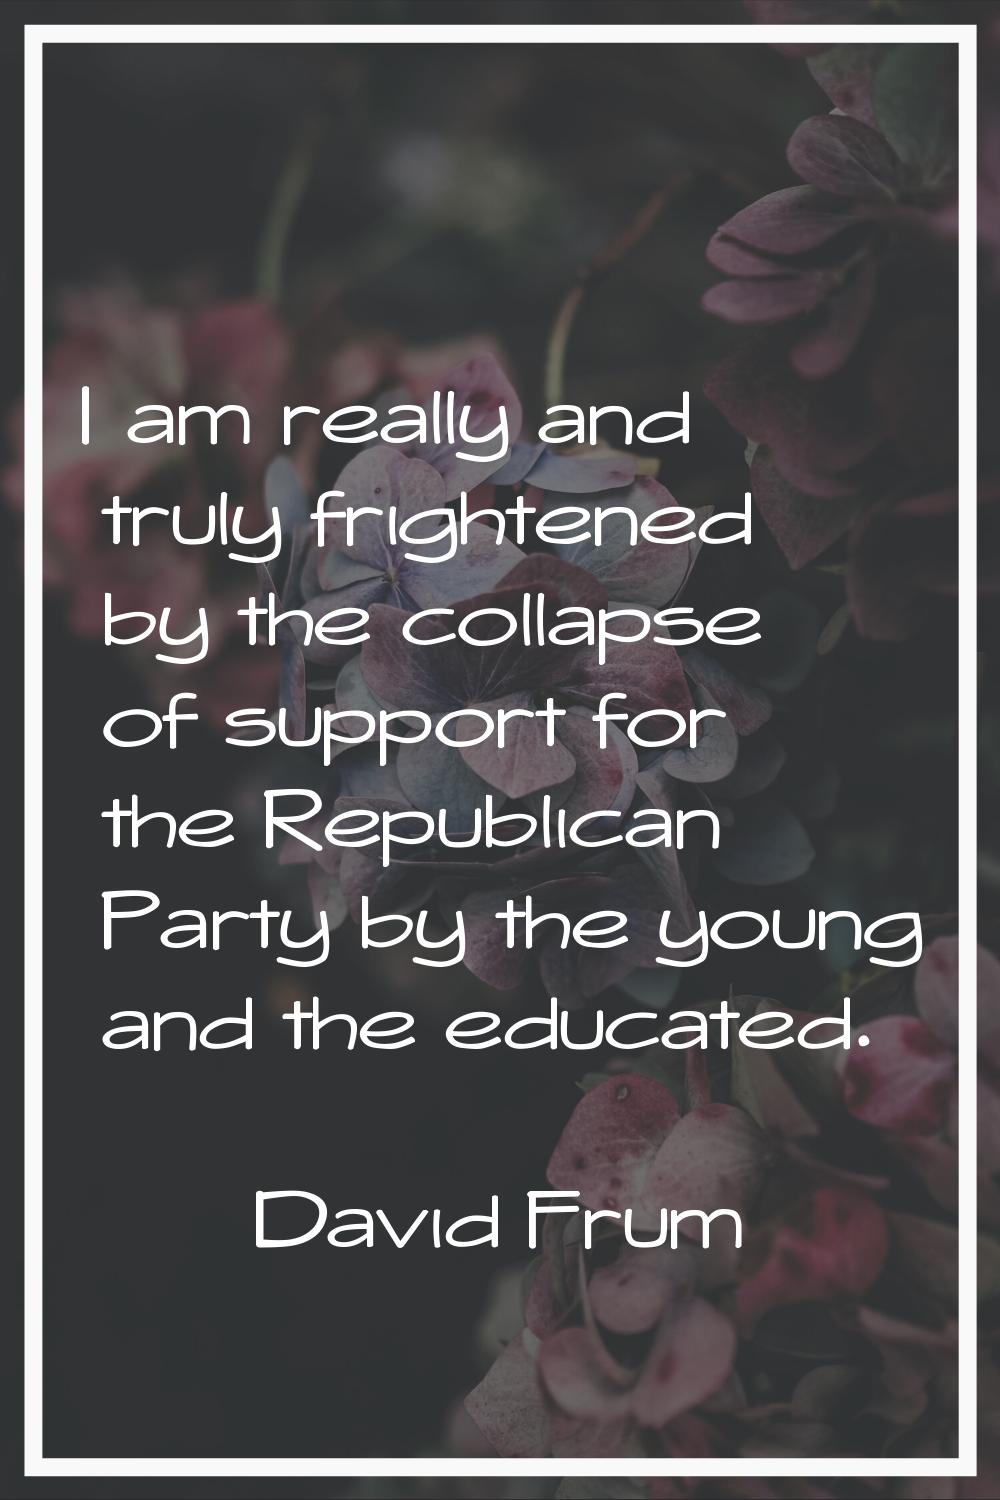 I am really and truly frightened by the collapse of support for the Republican Party by the young a